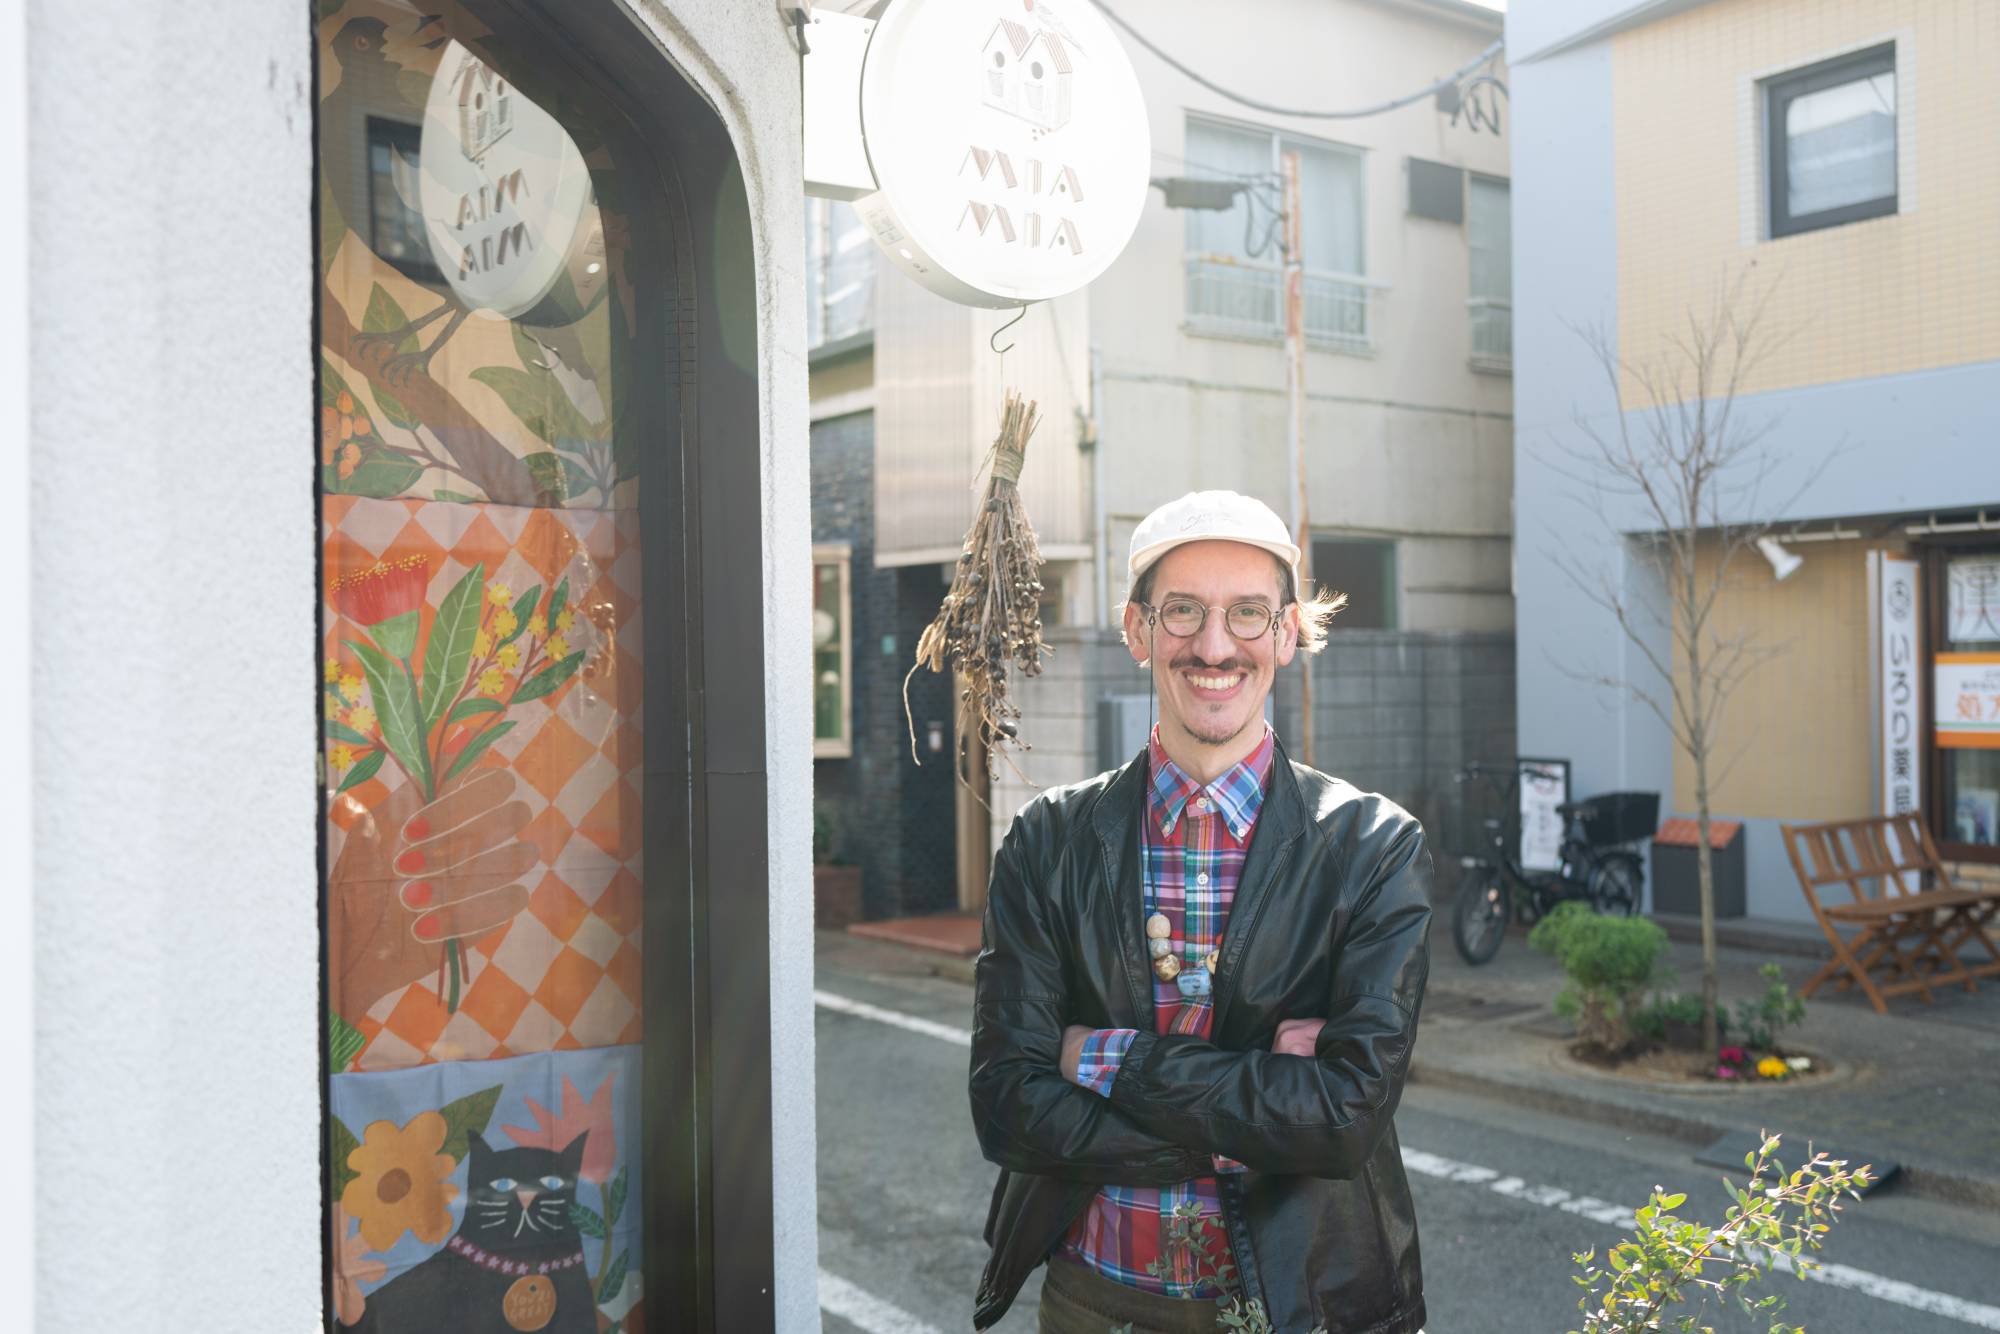 Vaughan Allison and his wife, Rie, opened their cafe, Mia Mia, in Toshima Ward, Tokyo, in the spring of 2020. Since then, the Australian barista has fostered a loyal following through community outreach. | LANCE HENDERSTEIN